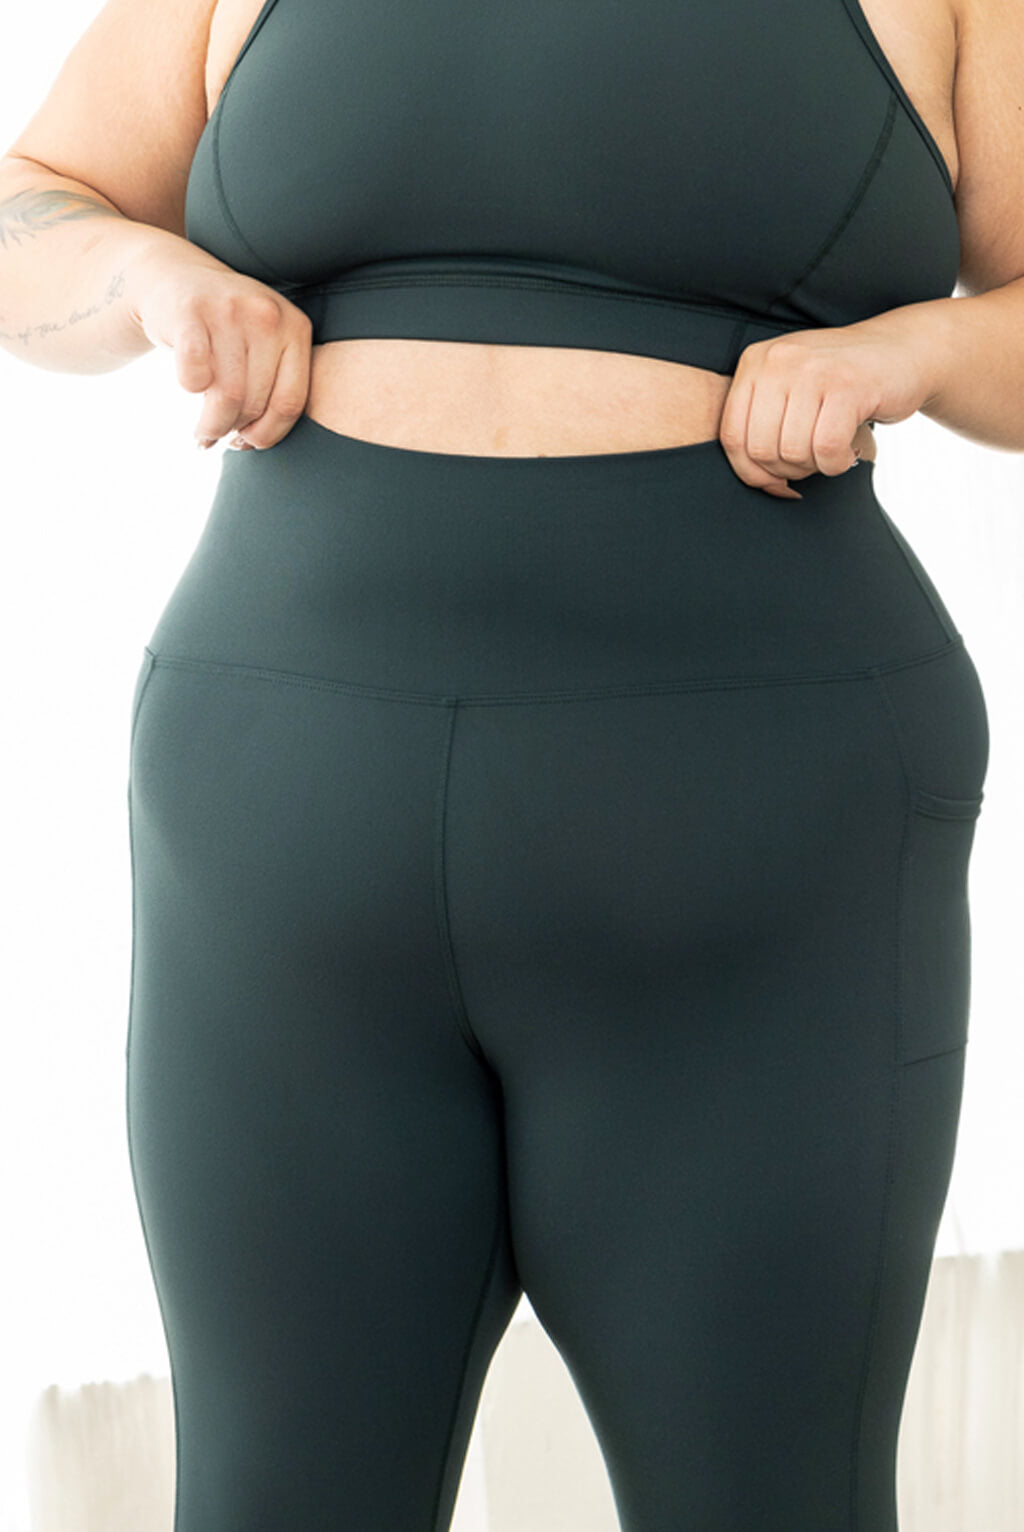 My Top-Rated $25 Leggings Survived Workouts, Washing, and Weight Gain